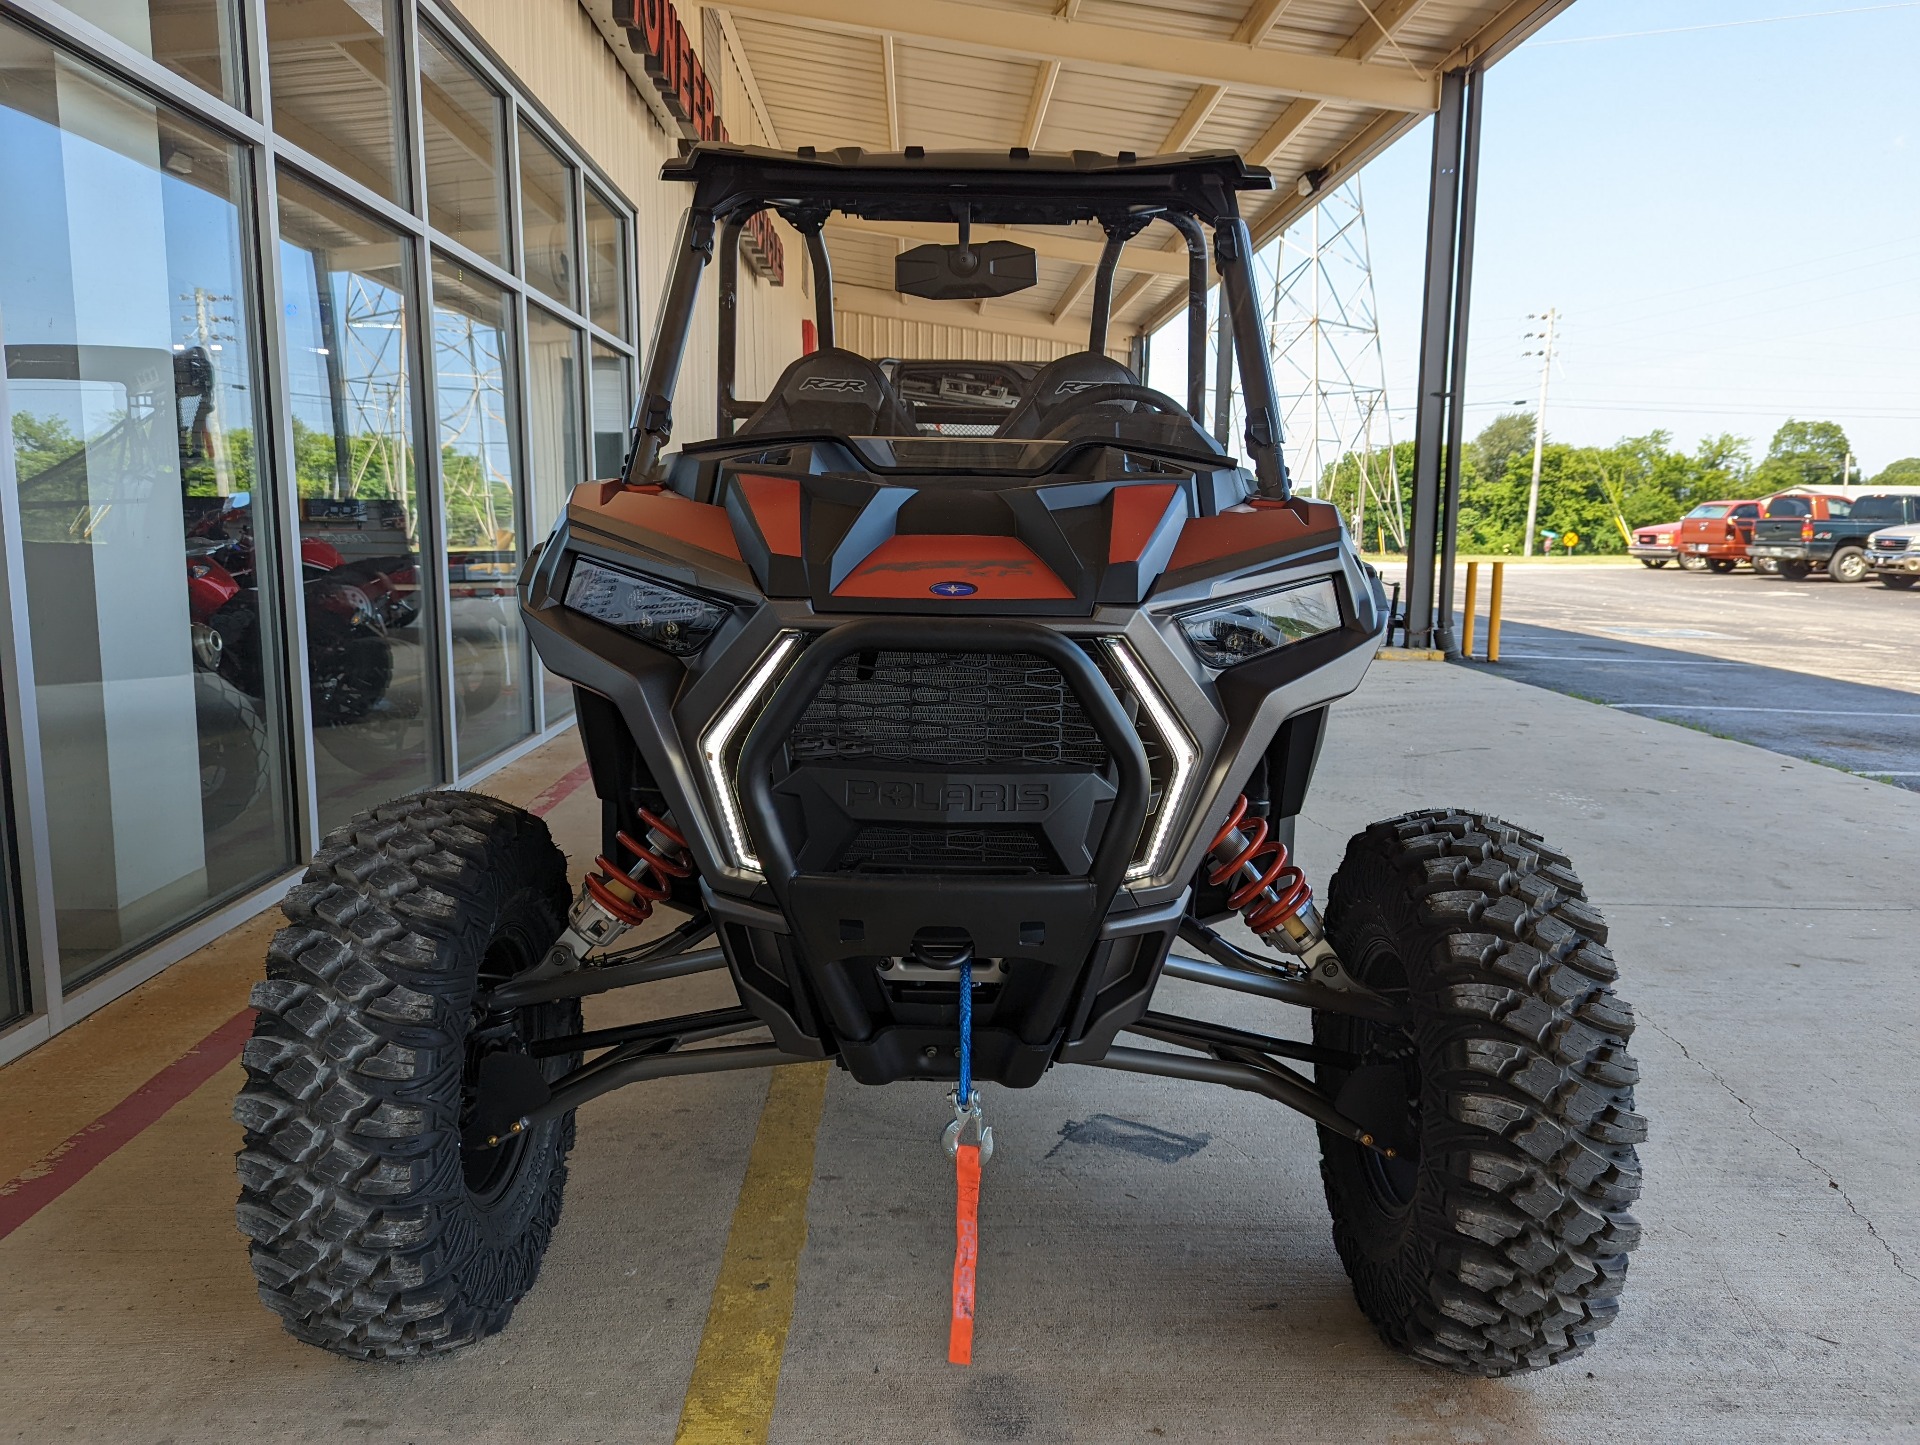 2022 Polaris RZR XP 1000 Trails & Rocks in Winchester, Tennessee - Photo 2